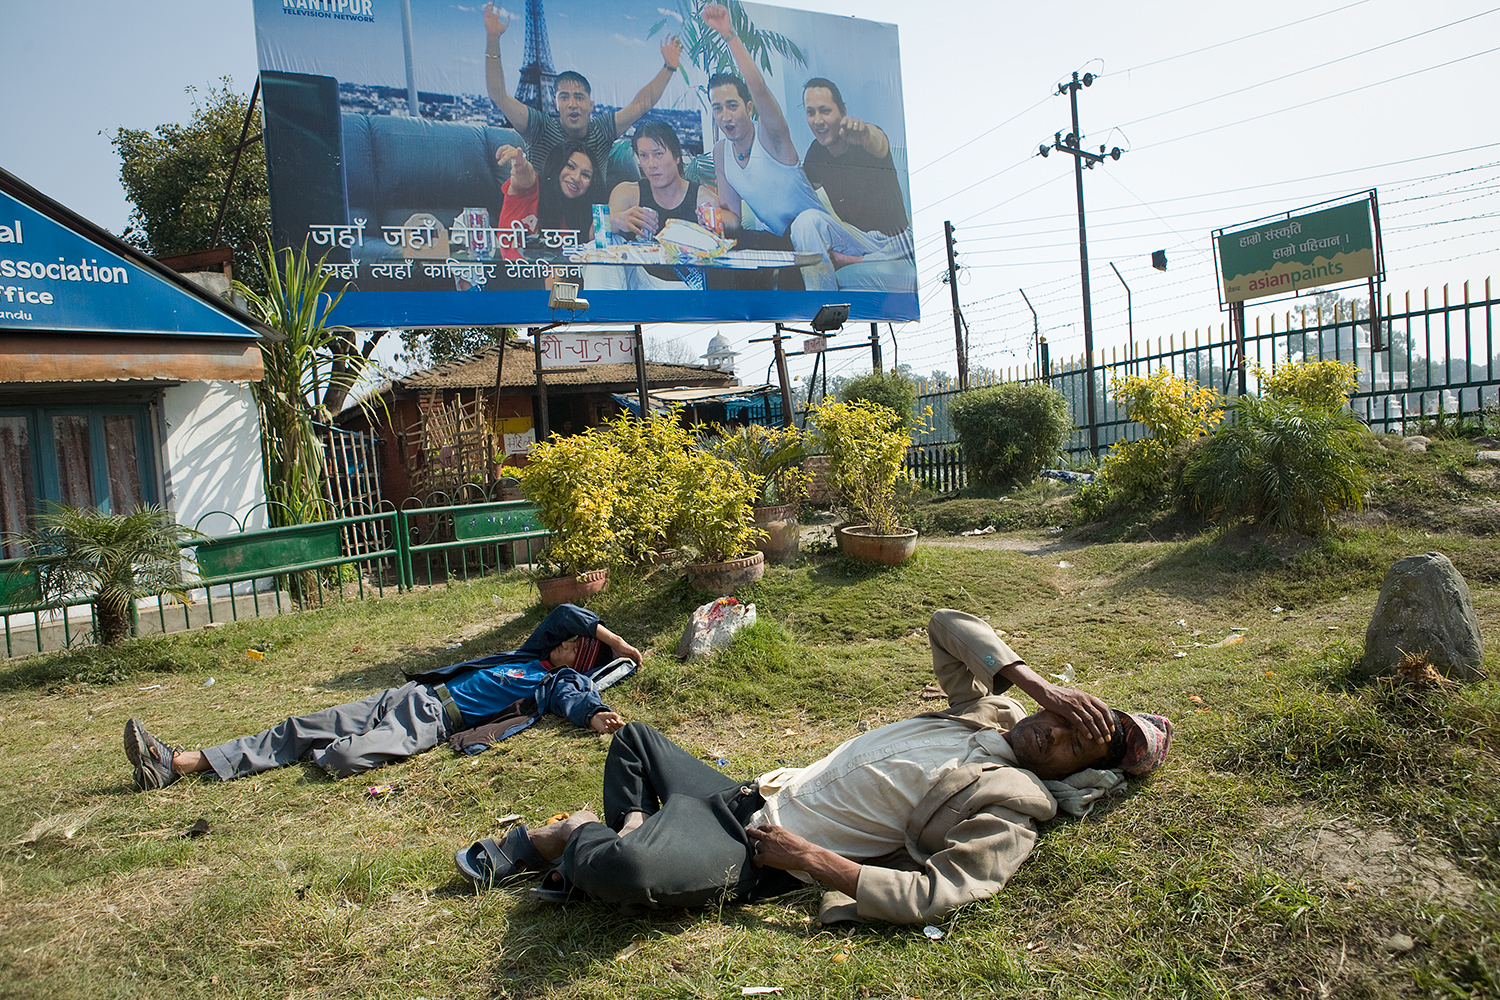  Two men lie in the grass near the intersection of busy streets in Kathmandu. 